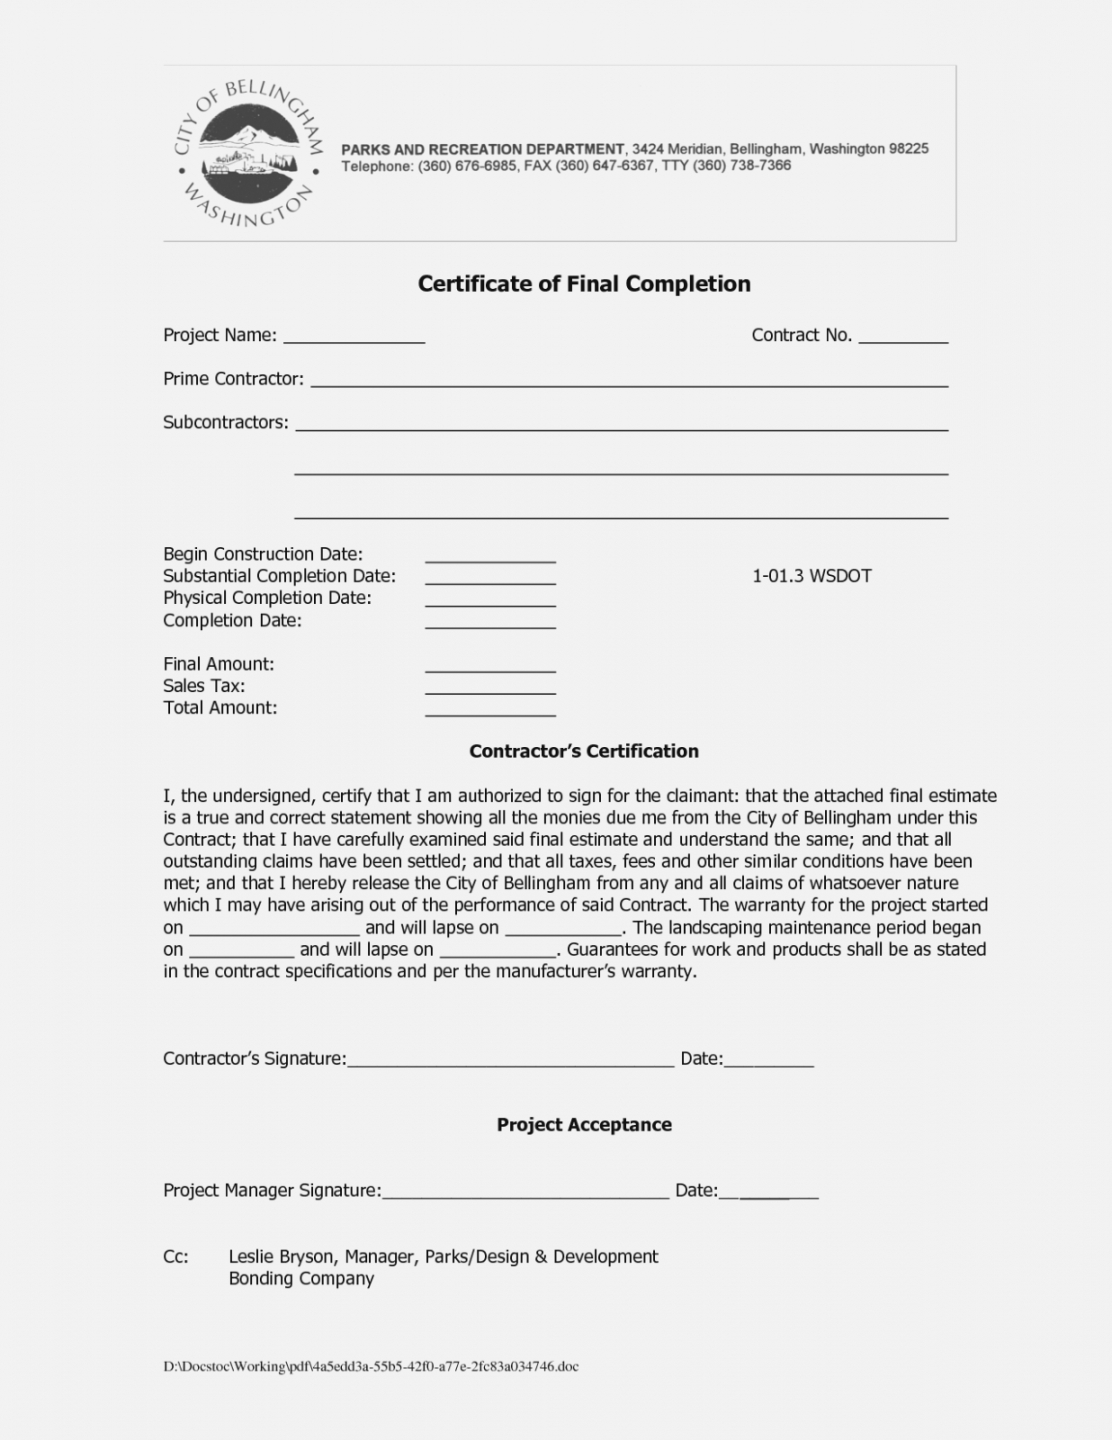 Roofing Certificate Of Completion Template – Zimer.bwong.co With Certificate Of Substantial Completion Template